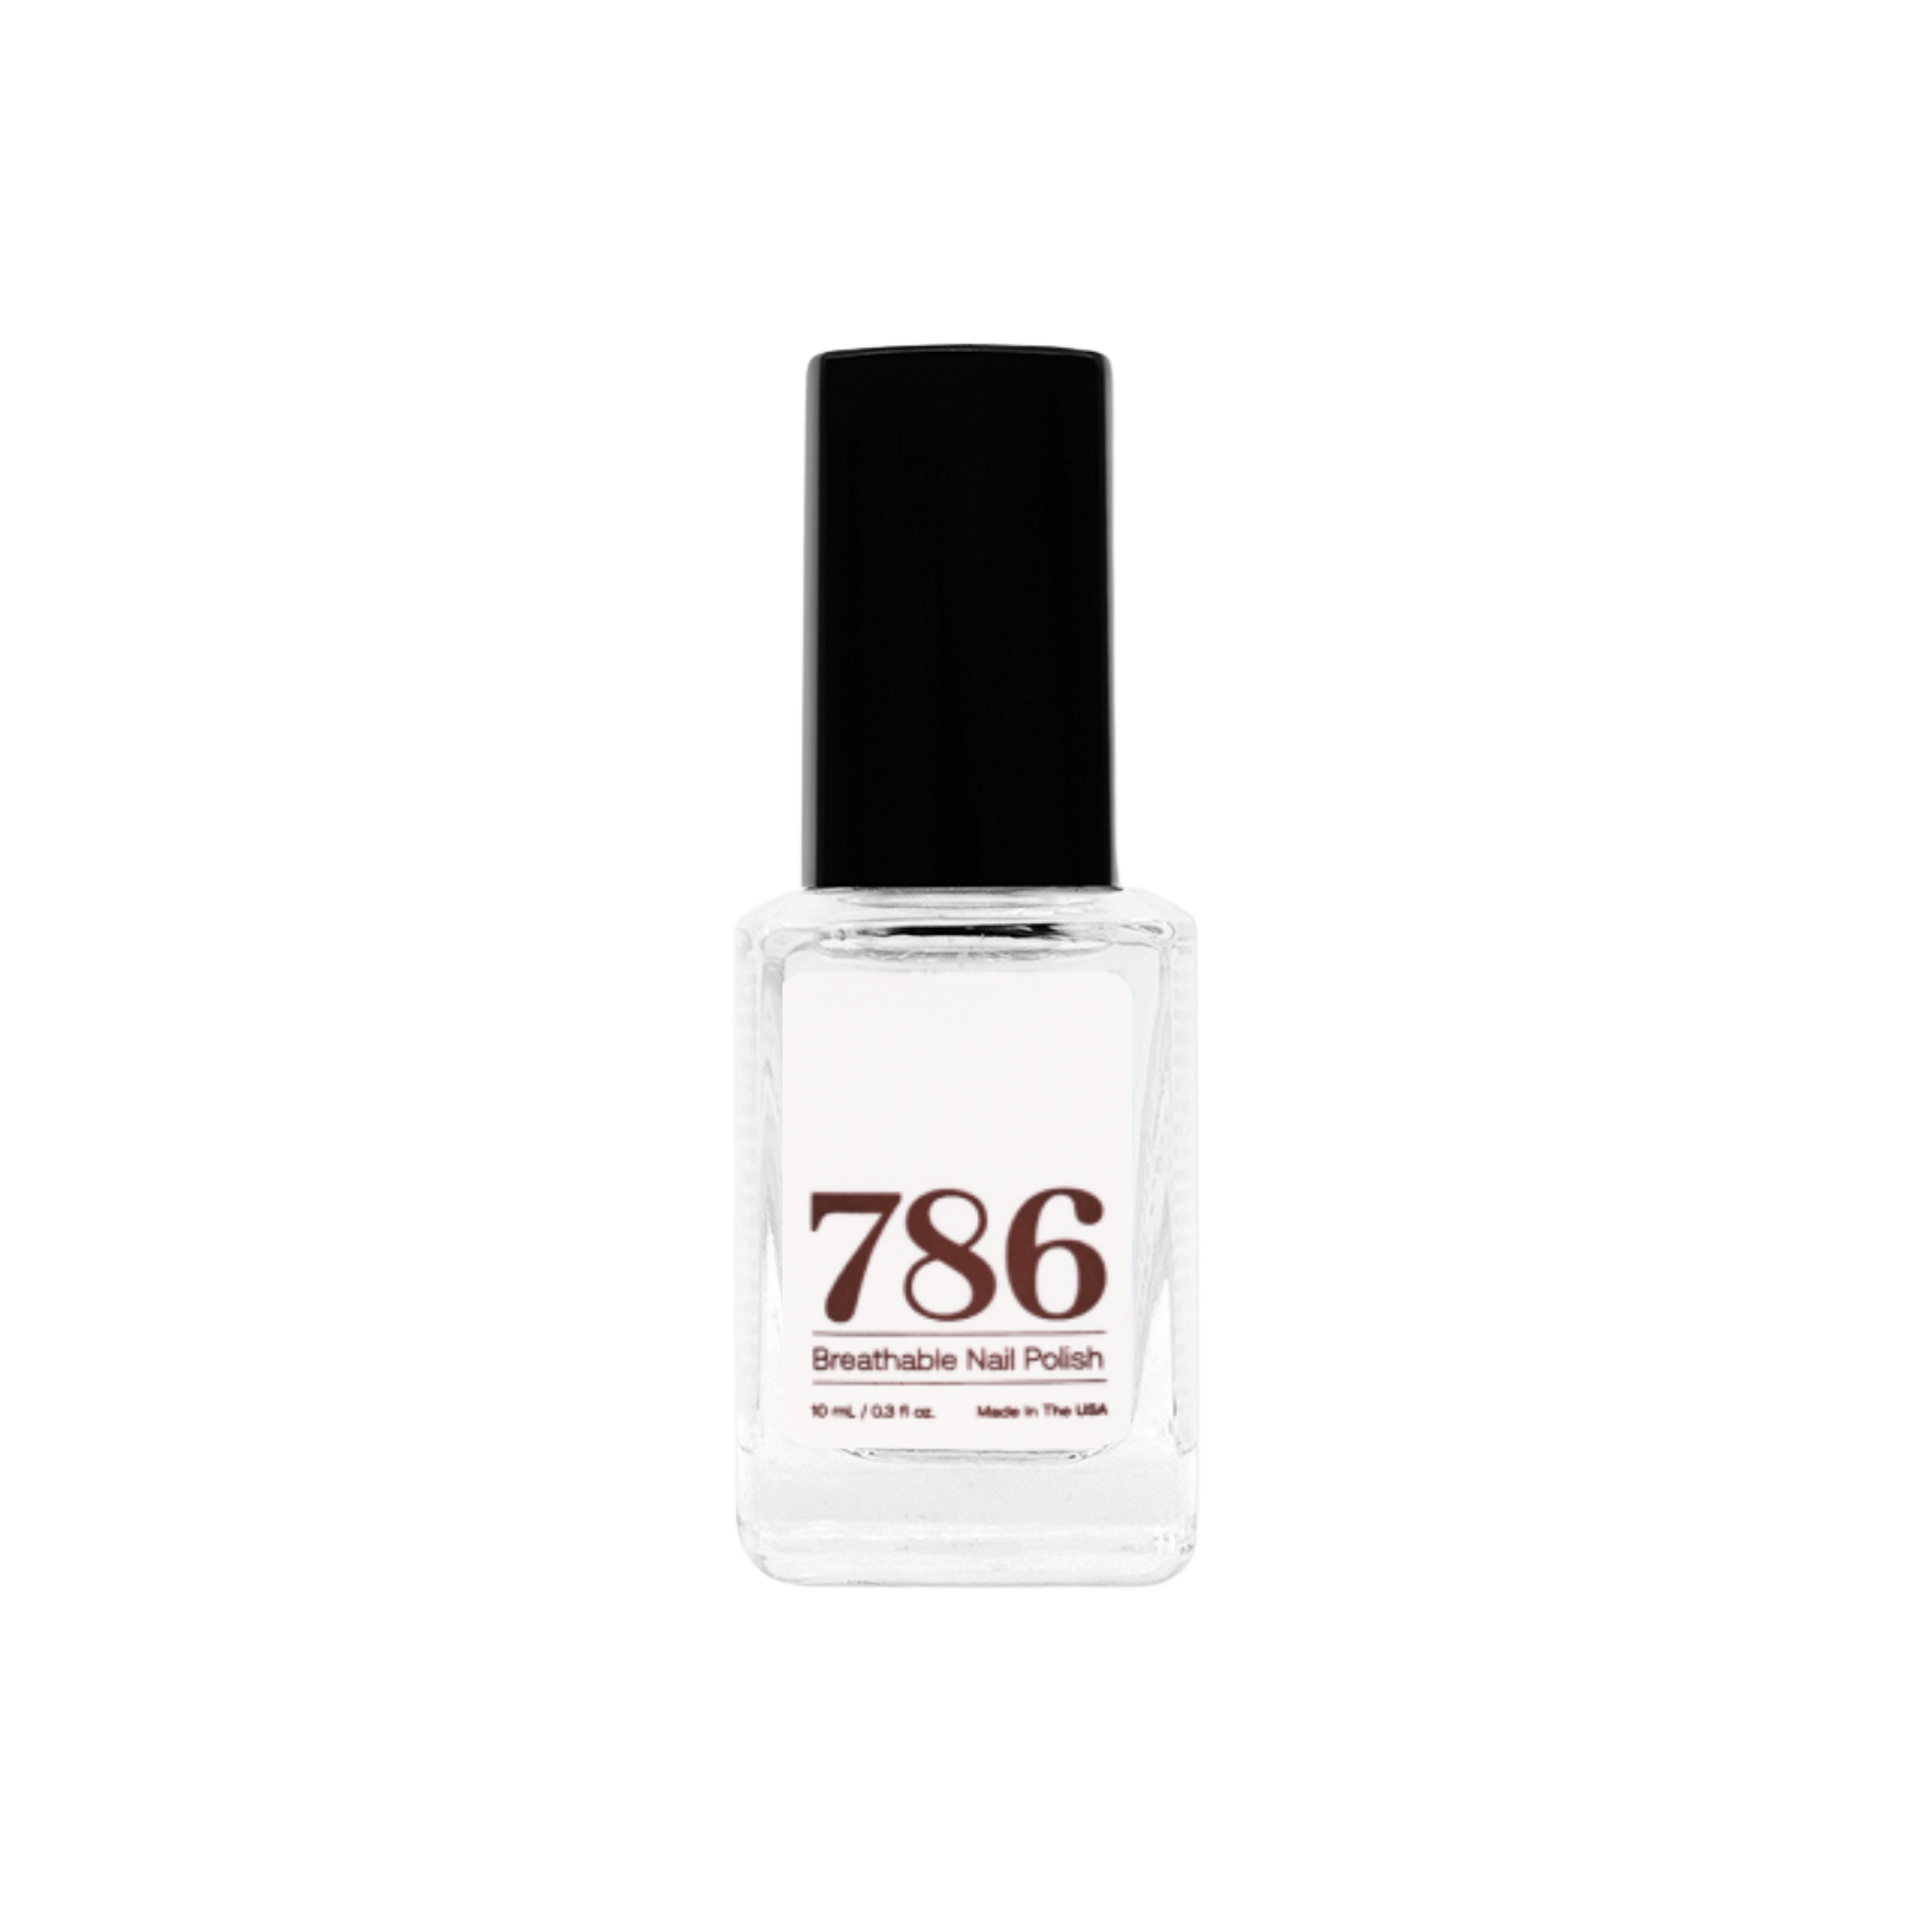 Buy Chefchaouen: 786 Cosmetics Halal Nail Polish - Wudhu Friendly - Vegan  (Chefchaouen) Online at Low Prices in India - Amazon.in